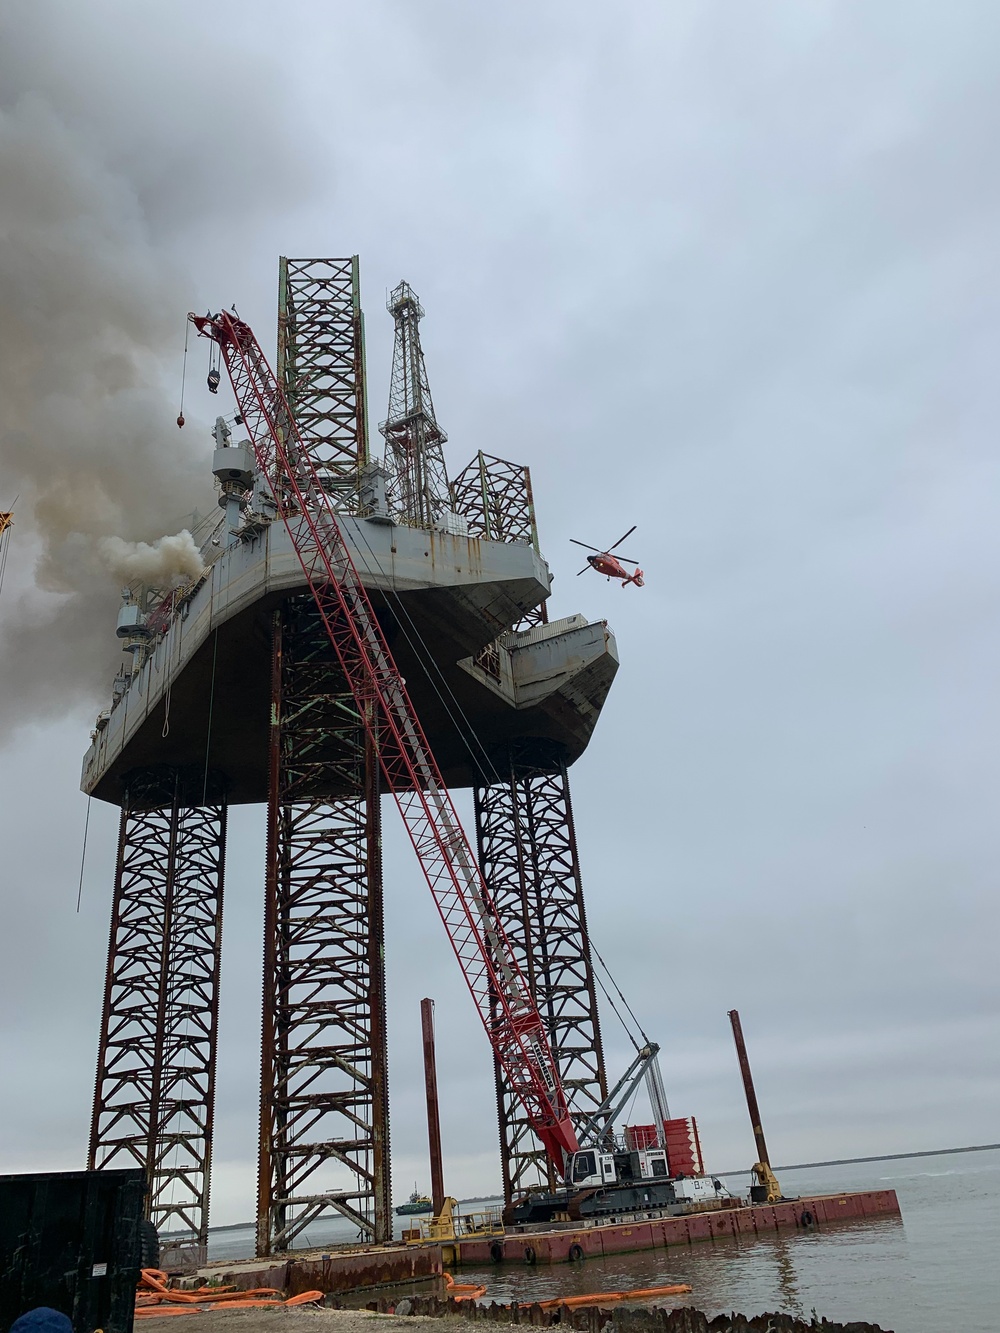 Coast Guard rescues 9 from rig on fire near Sabine Pass, Texas